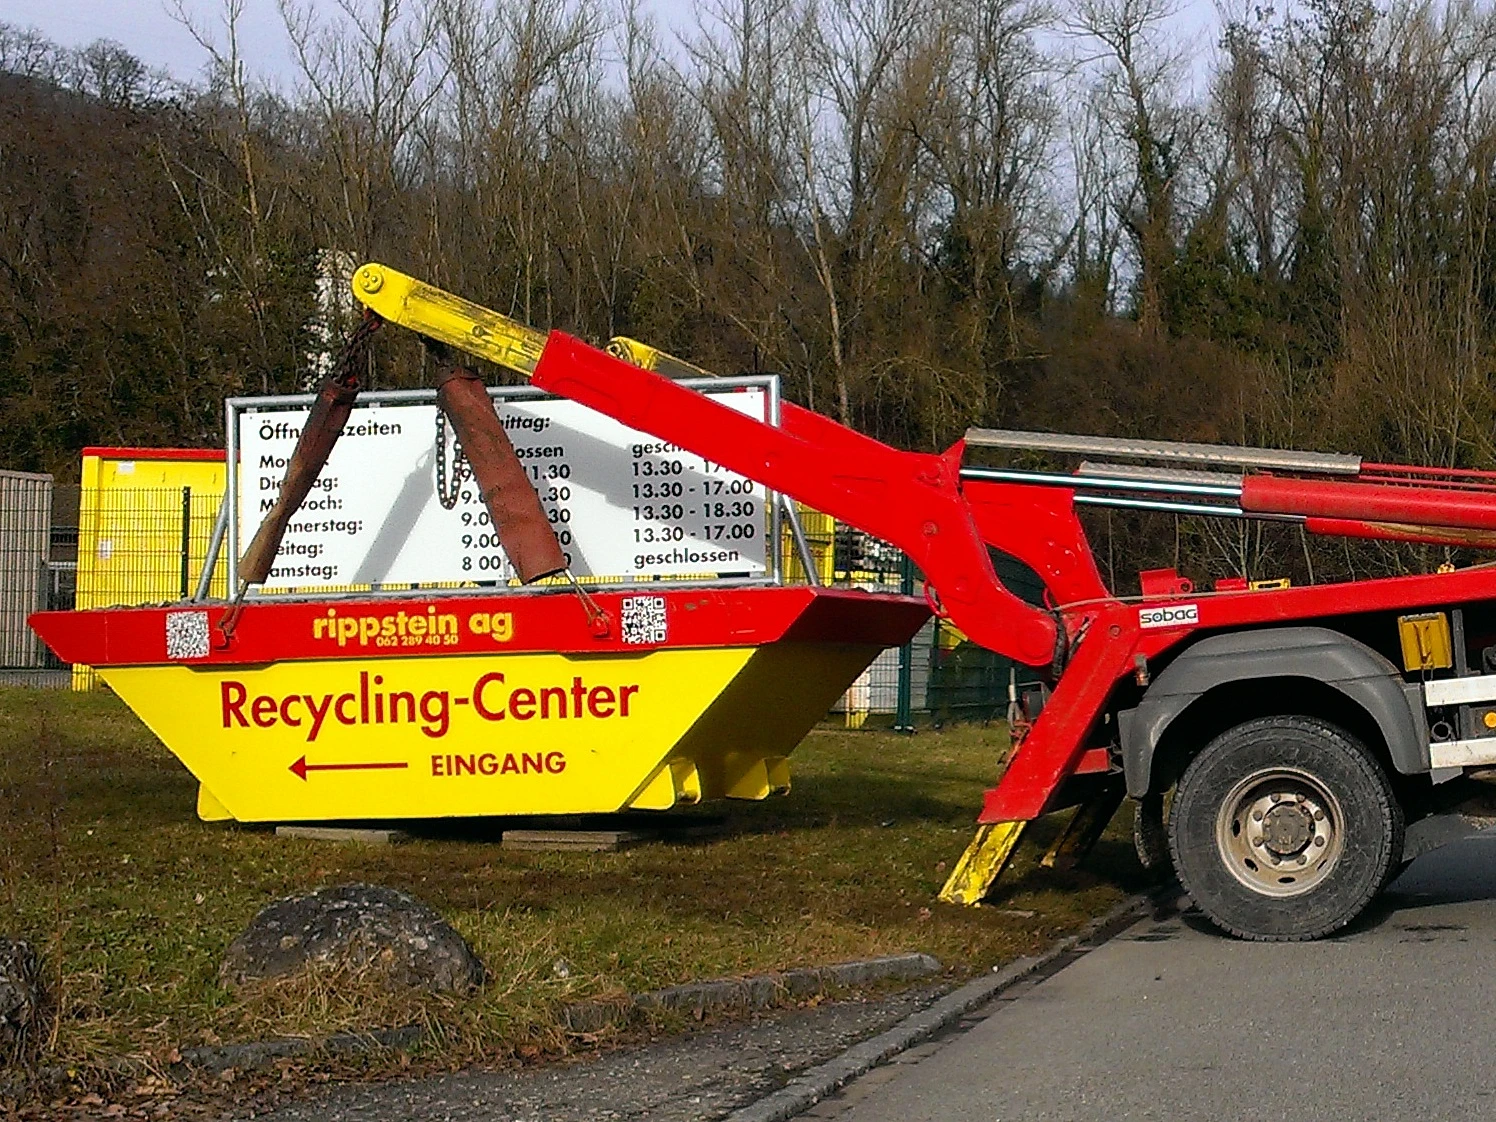 Recycling-Center Rippstein Transport AG